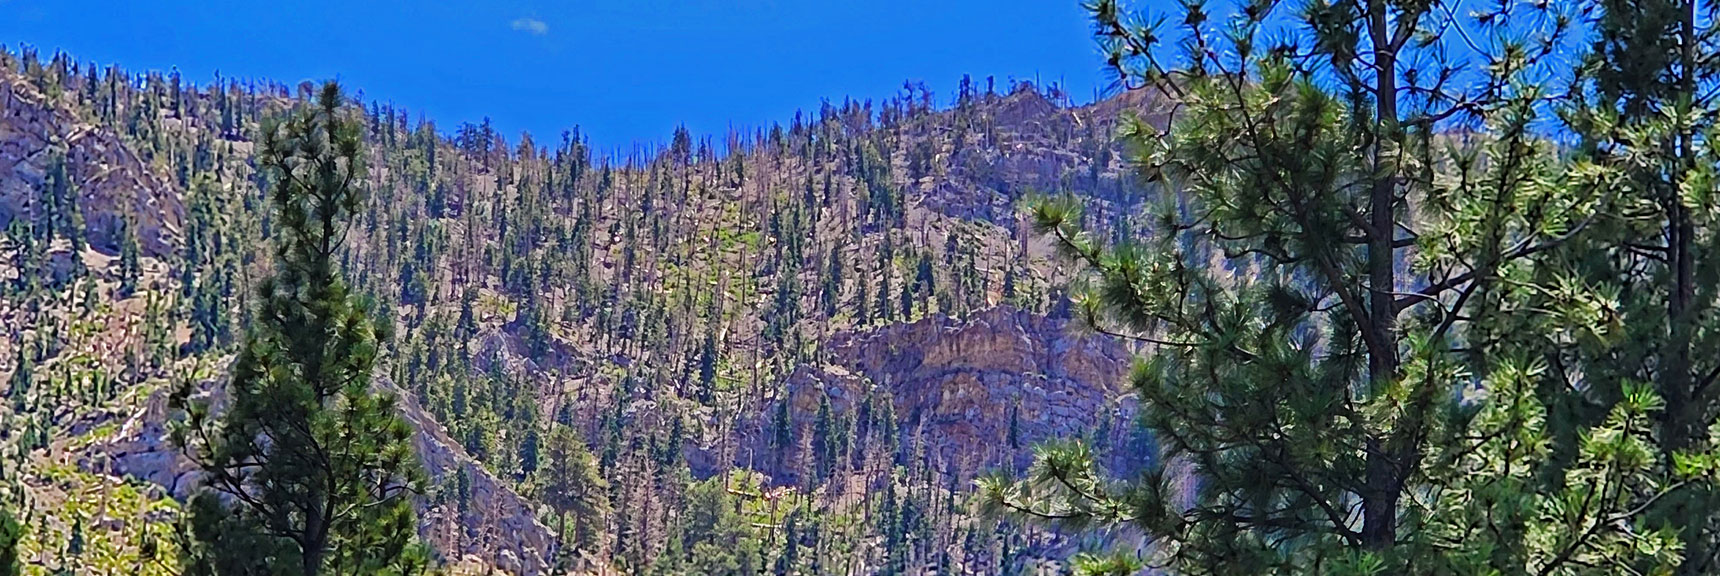 Closer View of Upper Access Point to Short Eastern Approach Ridge | Harris Mountain Triangle | Mt Charleston Wilderness, Nevada